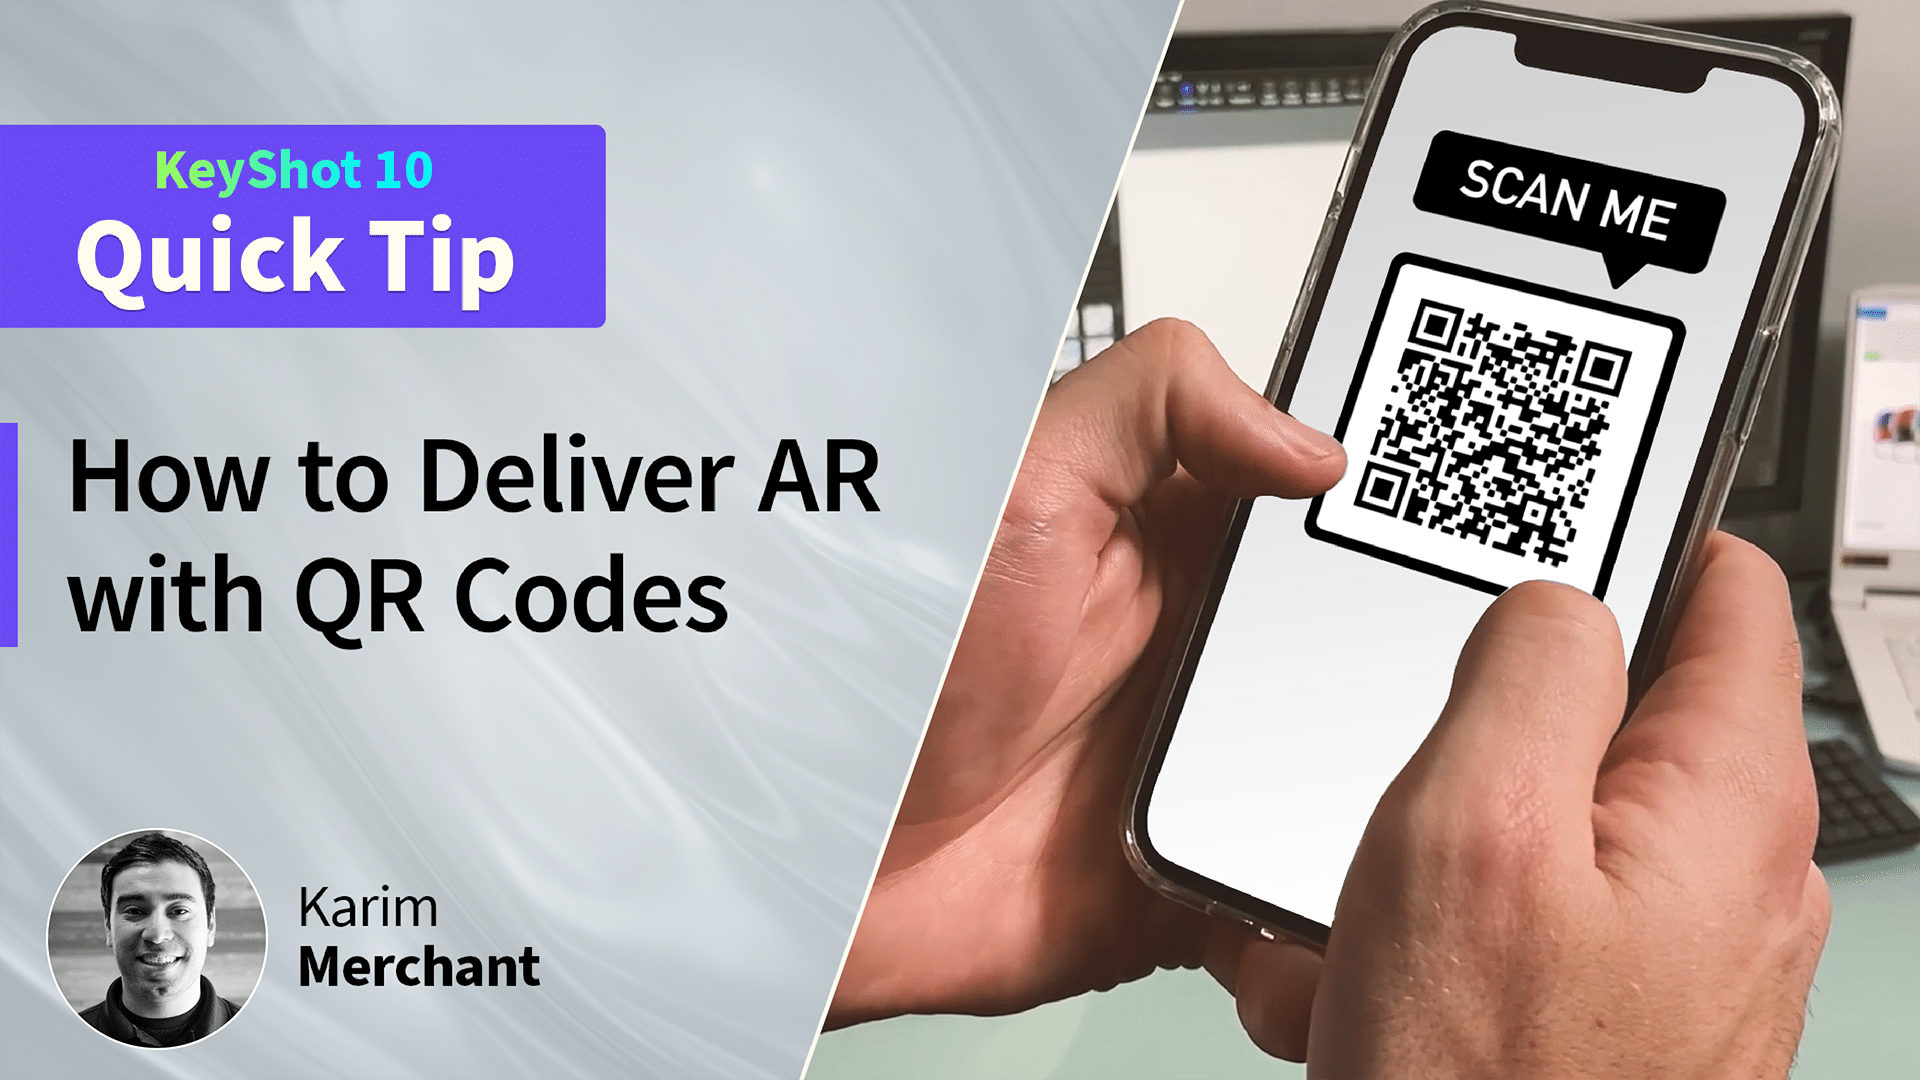 Quick Tip 135: Use QR Codes to Deliver AR